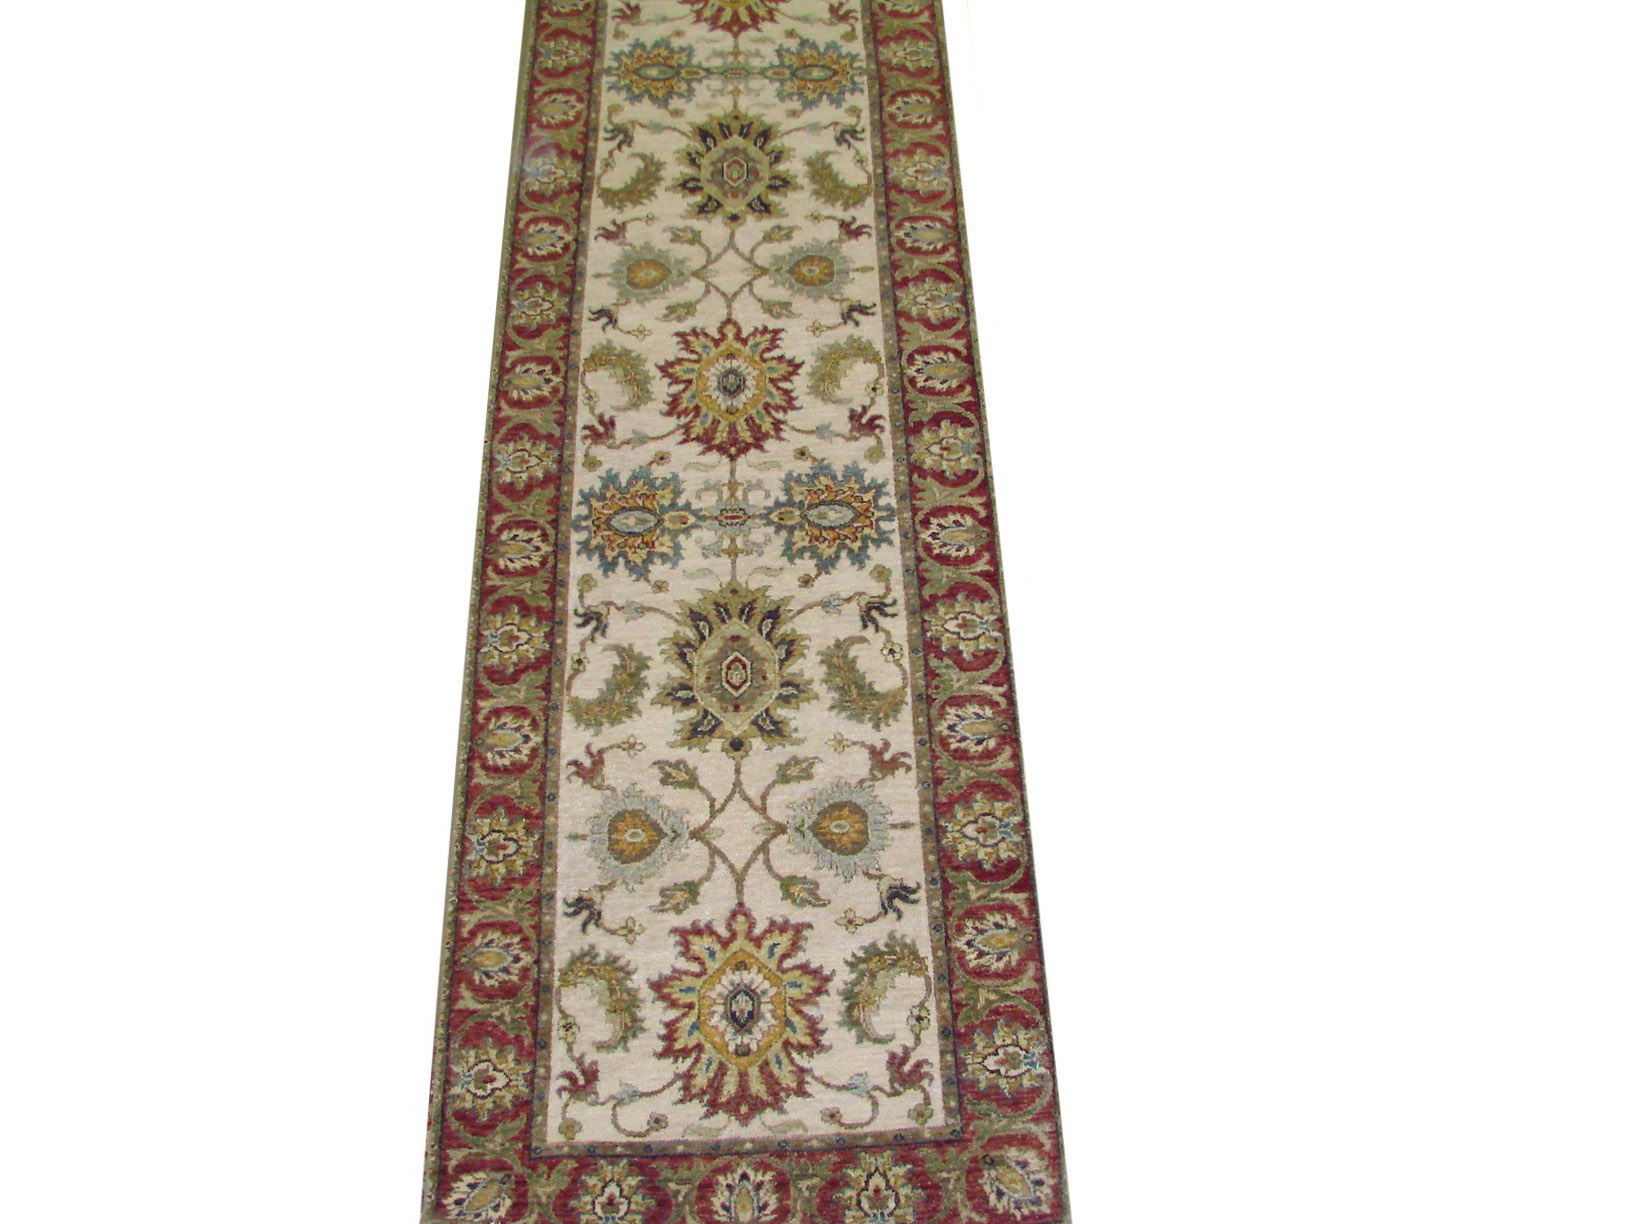 13 & Longer Runner Traditional Hand Knotted Wool Area Rug - MR022003